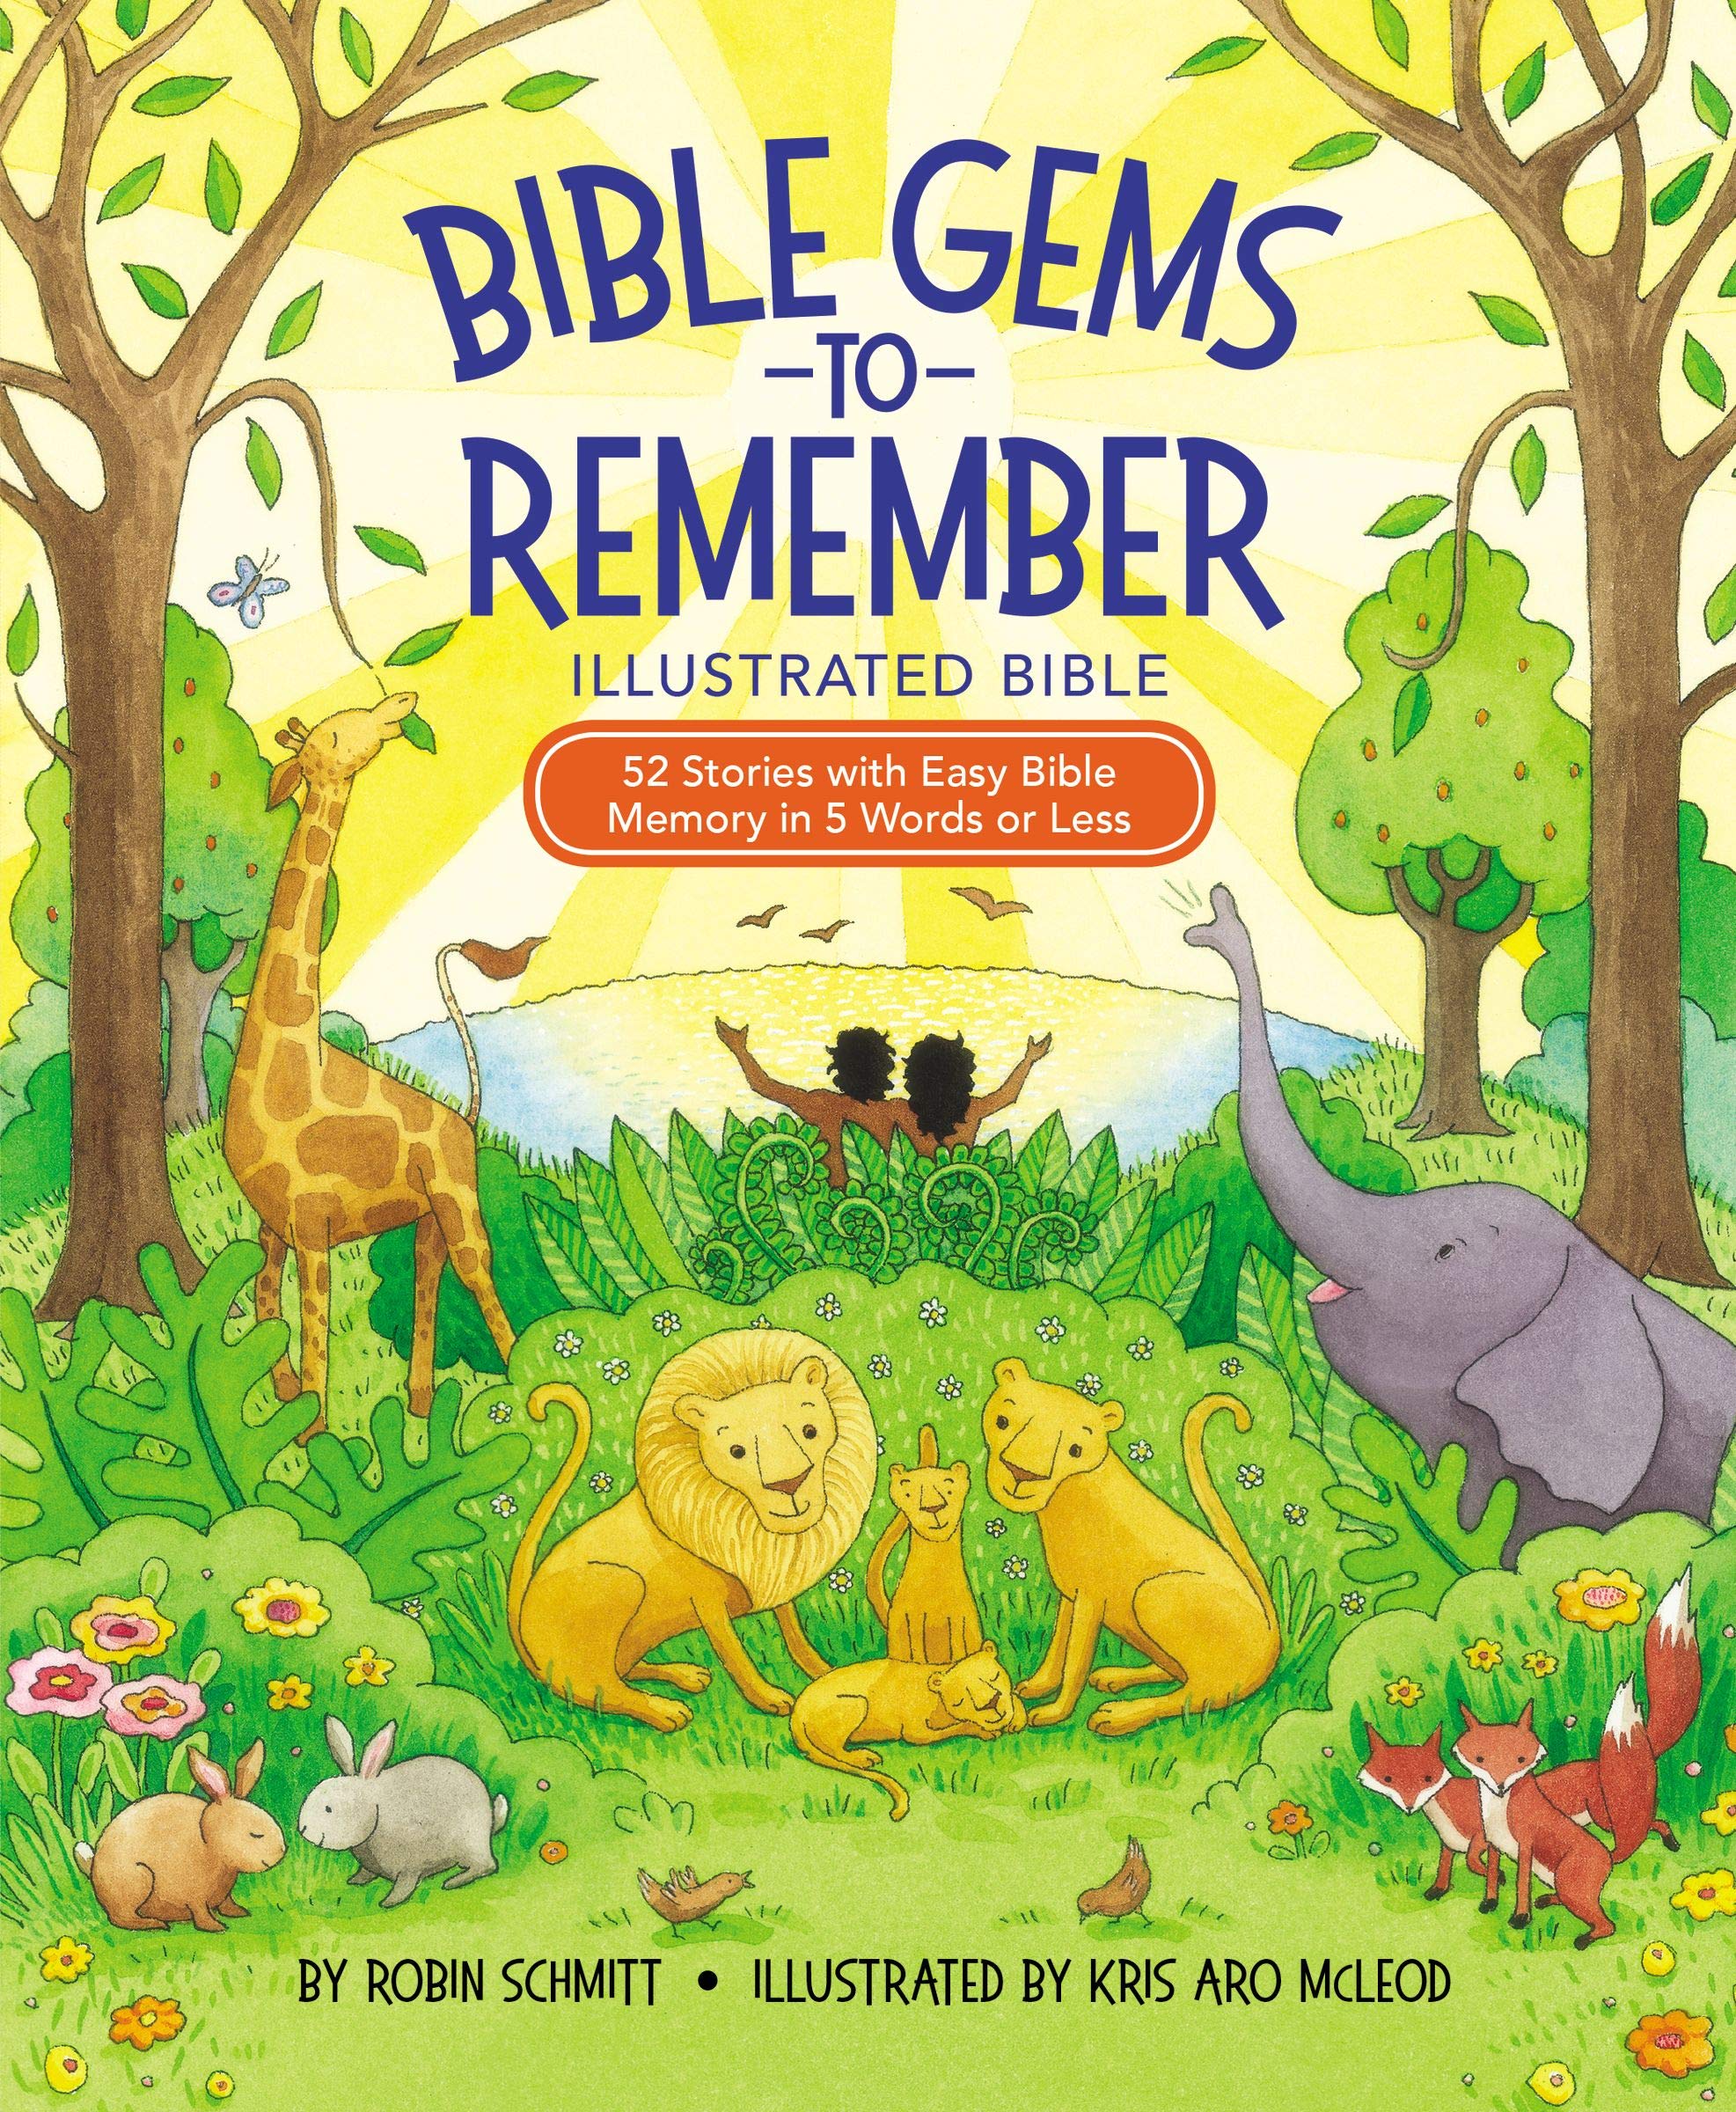 Bible Gems to Remember Illustrated Bible (Hardcover)